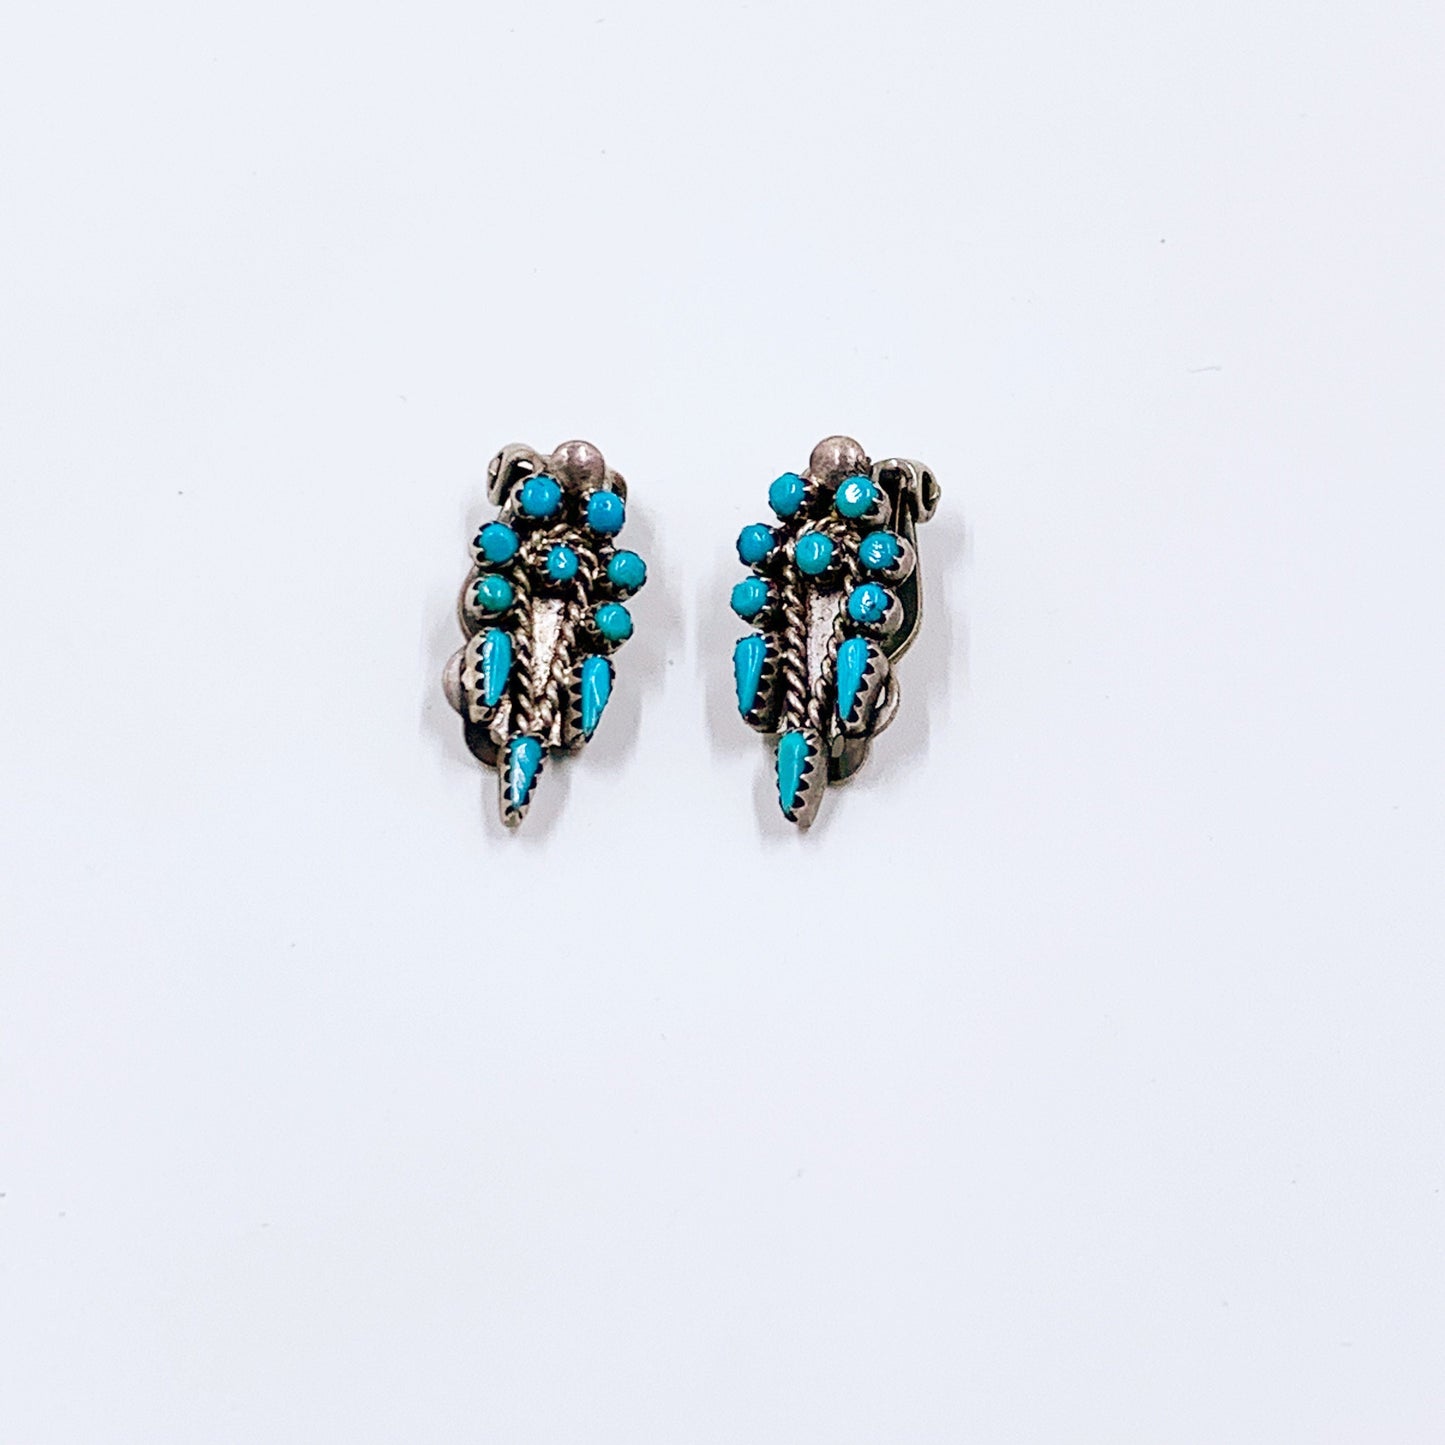 Vintage Turquoise Cluster Earrings | Petit Point Cluster Earrings | Turquoise Clip On Earrings